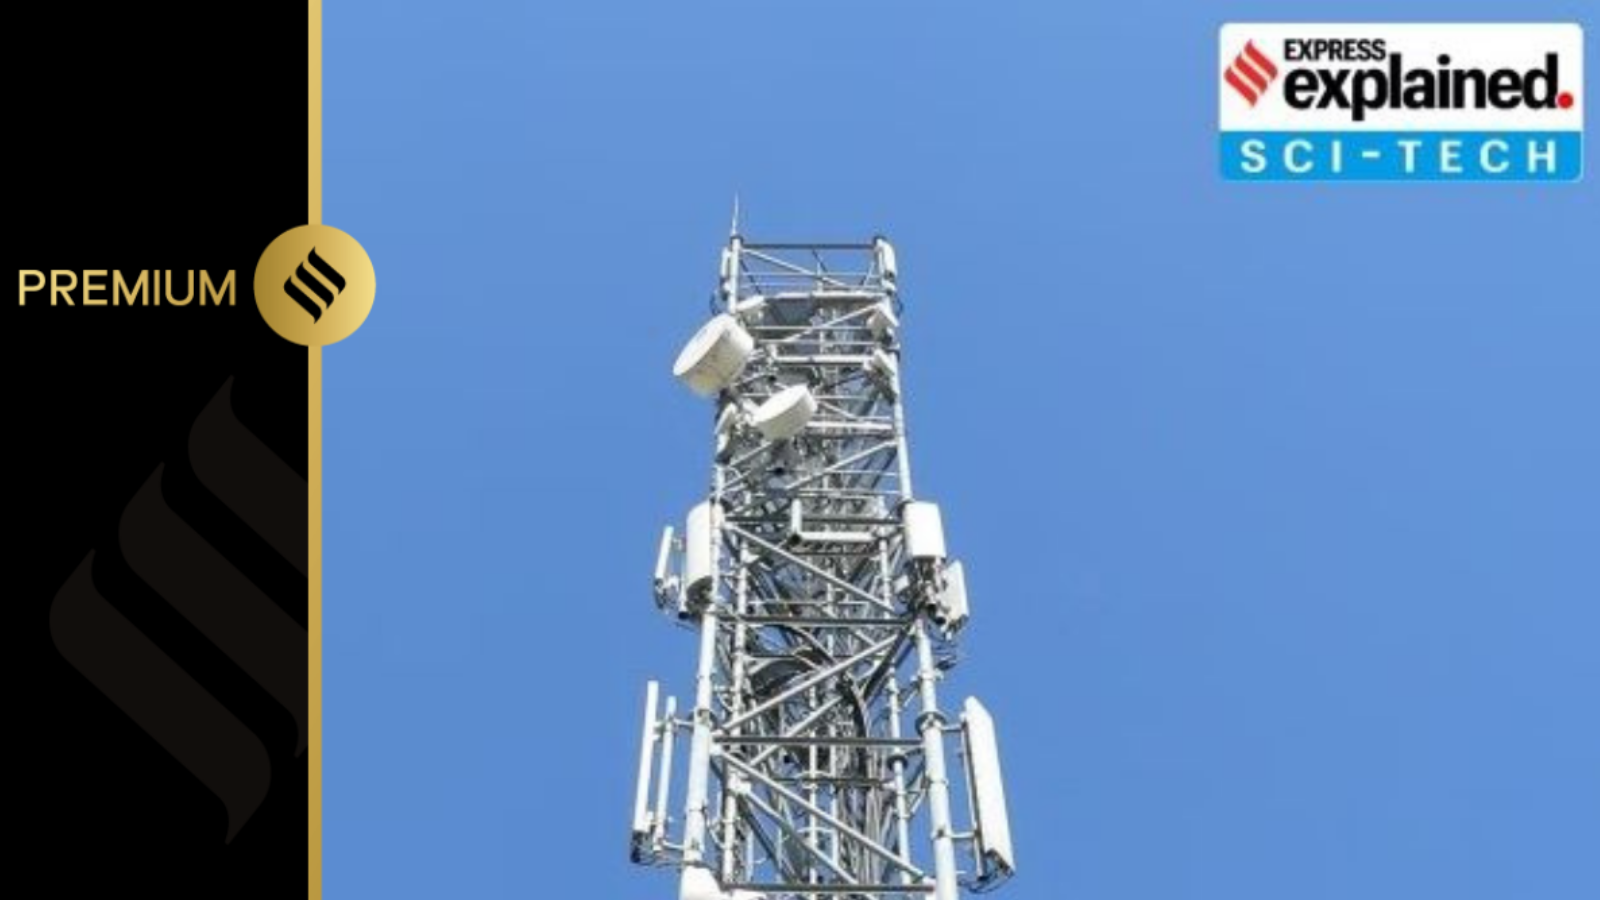 Telecommunications Bill, 2023: The changes it seeks in the telecom sector, why some have raised concerns